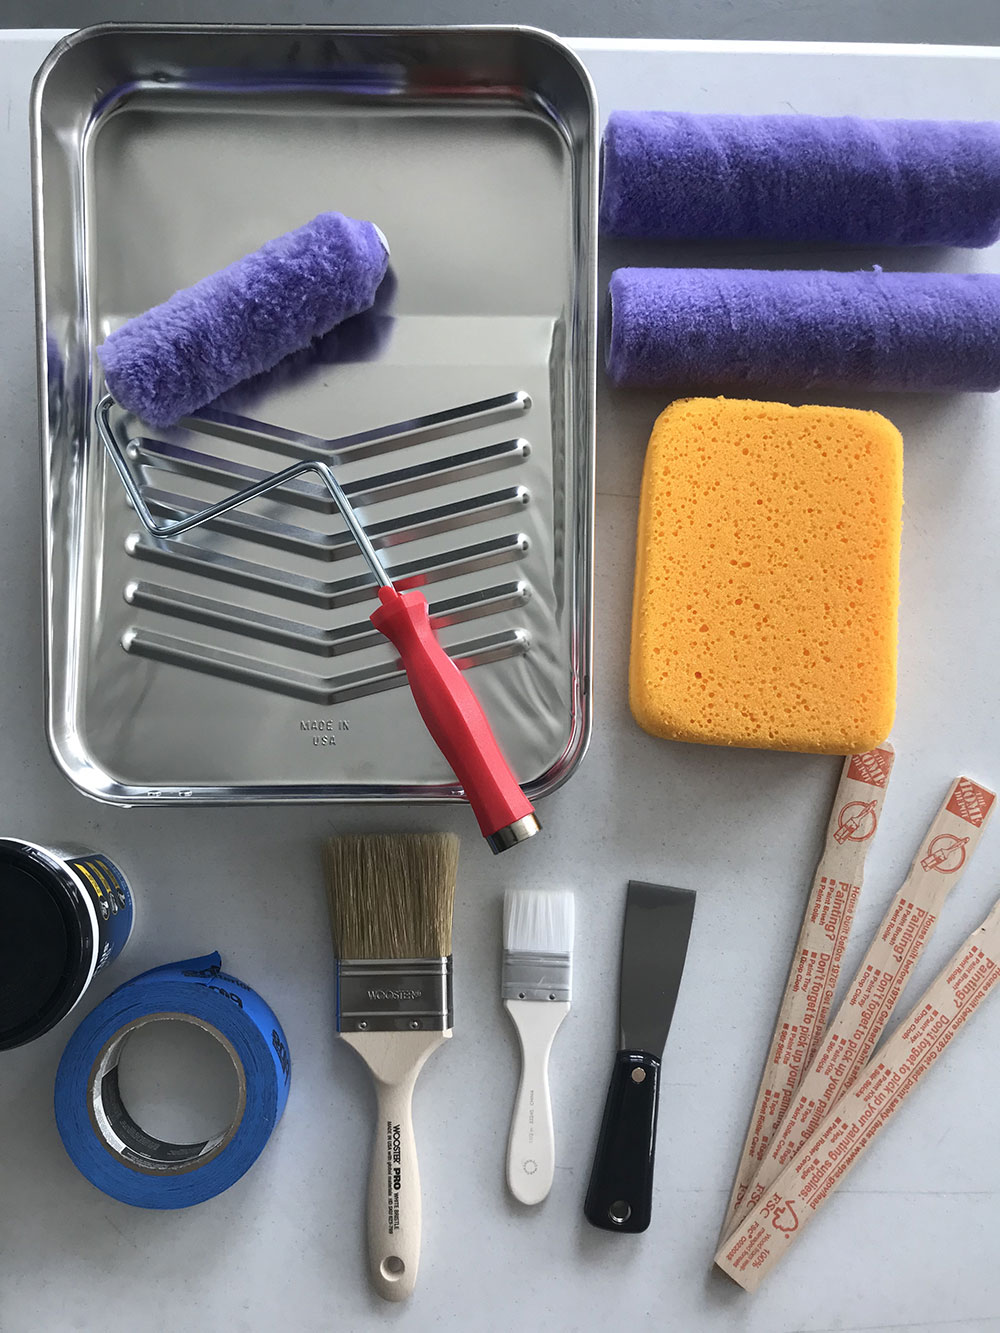 Tools How to paint bathroom cabinets and make them look good